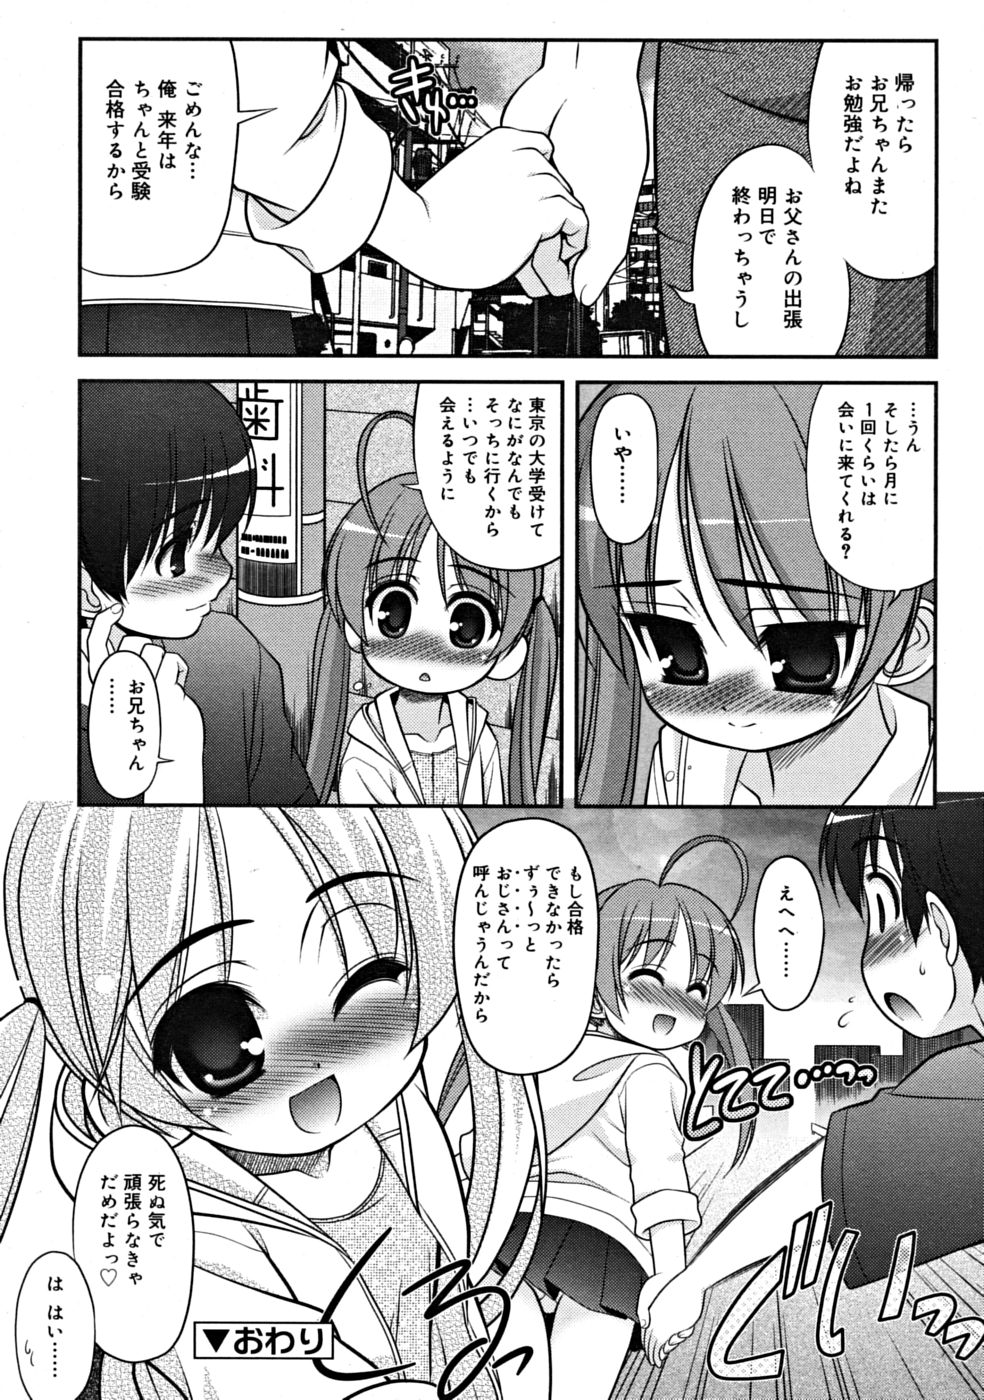 COMIC RiN 2008-09 page 44 full